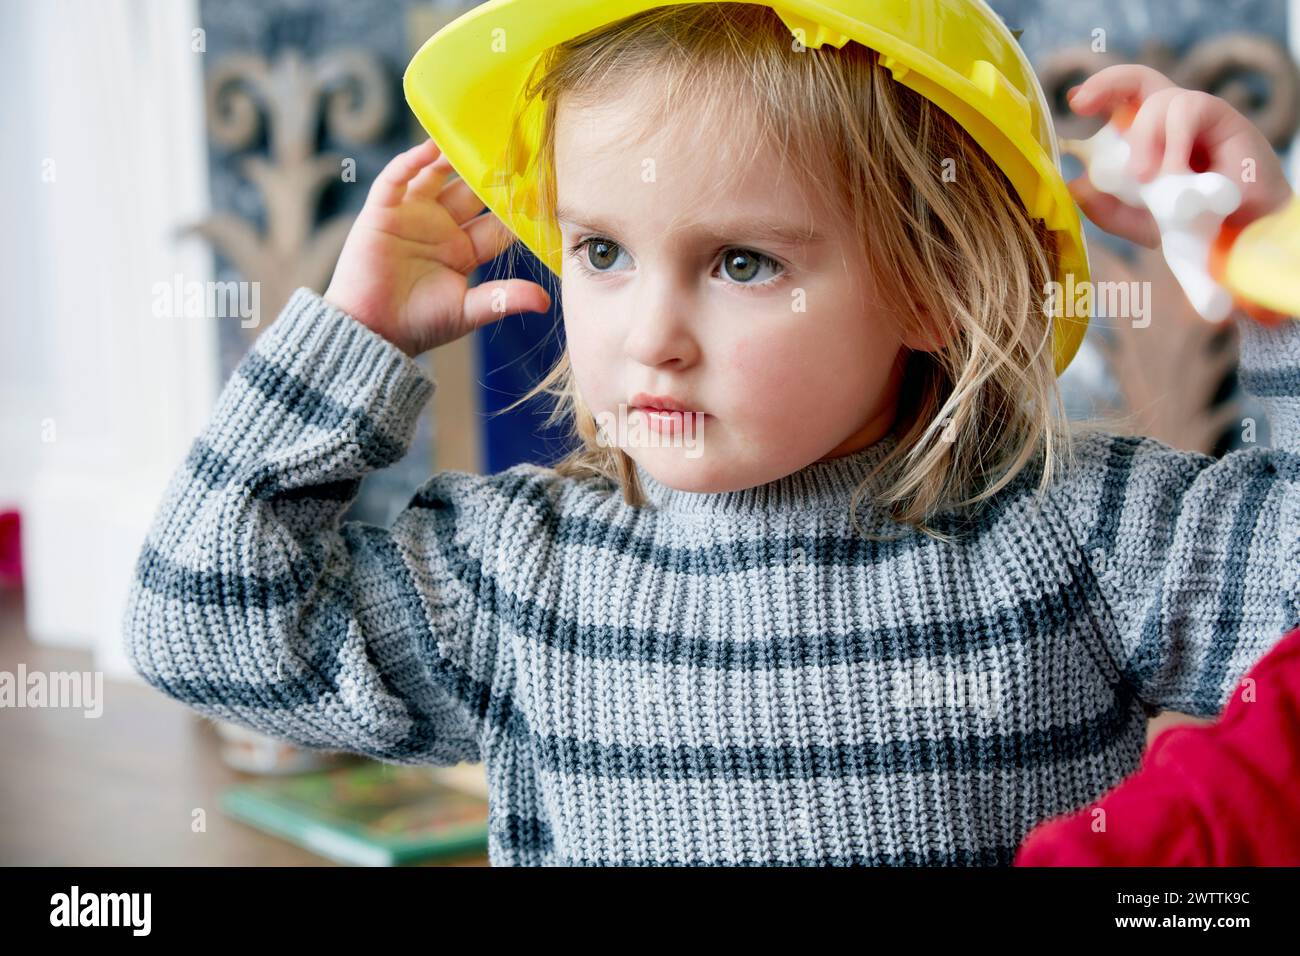 Child in a yellow hard hat Stock Photo